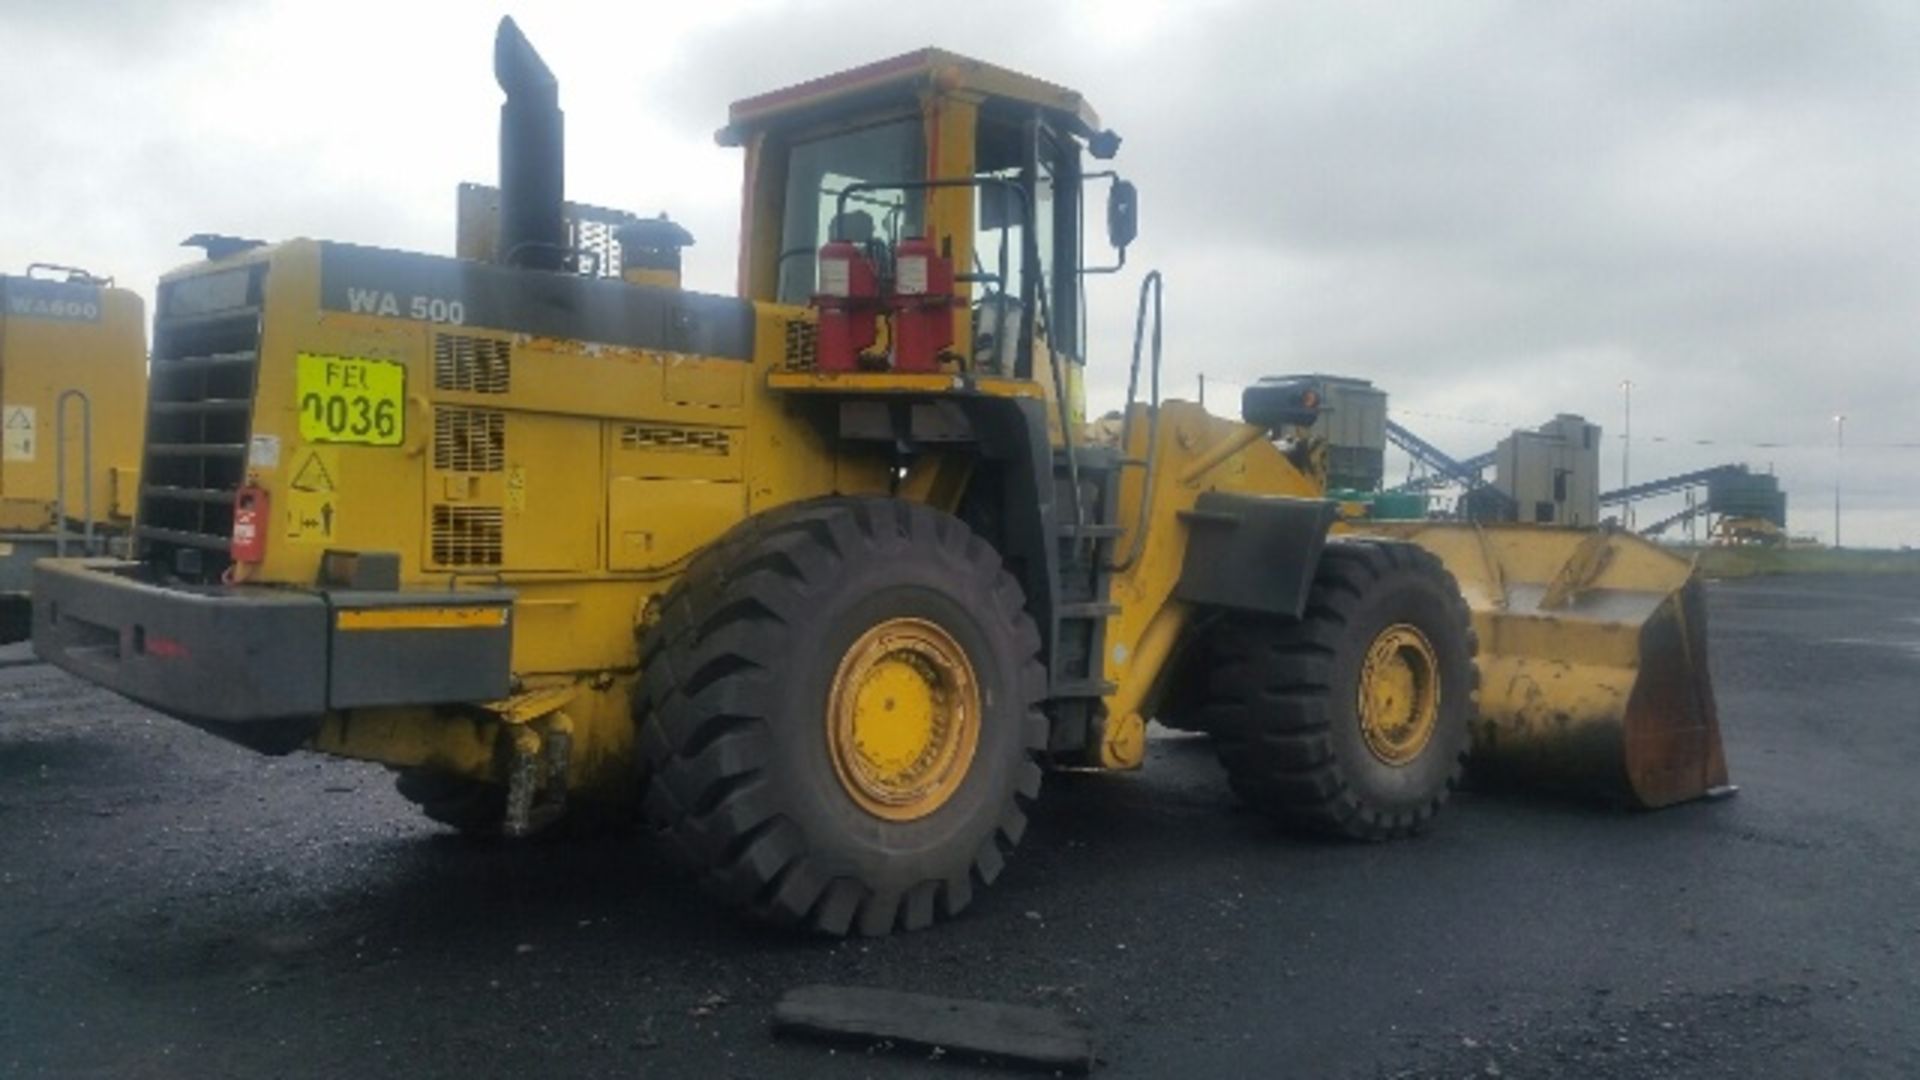 2000 KOMATSU WA500-3 FRONT END LOADER- SERIAL:50778 (LOCATED AT GLENCORE WITCONS COLLIERY) - Image 7 of 8